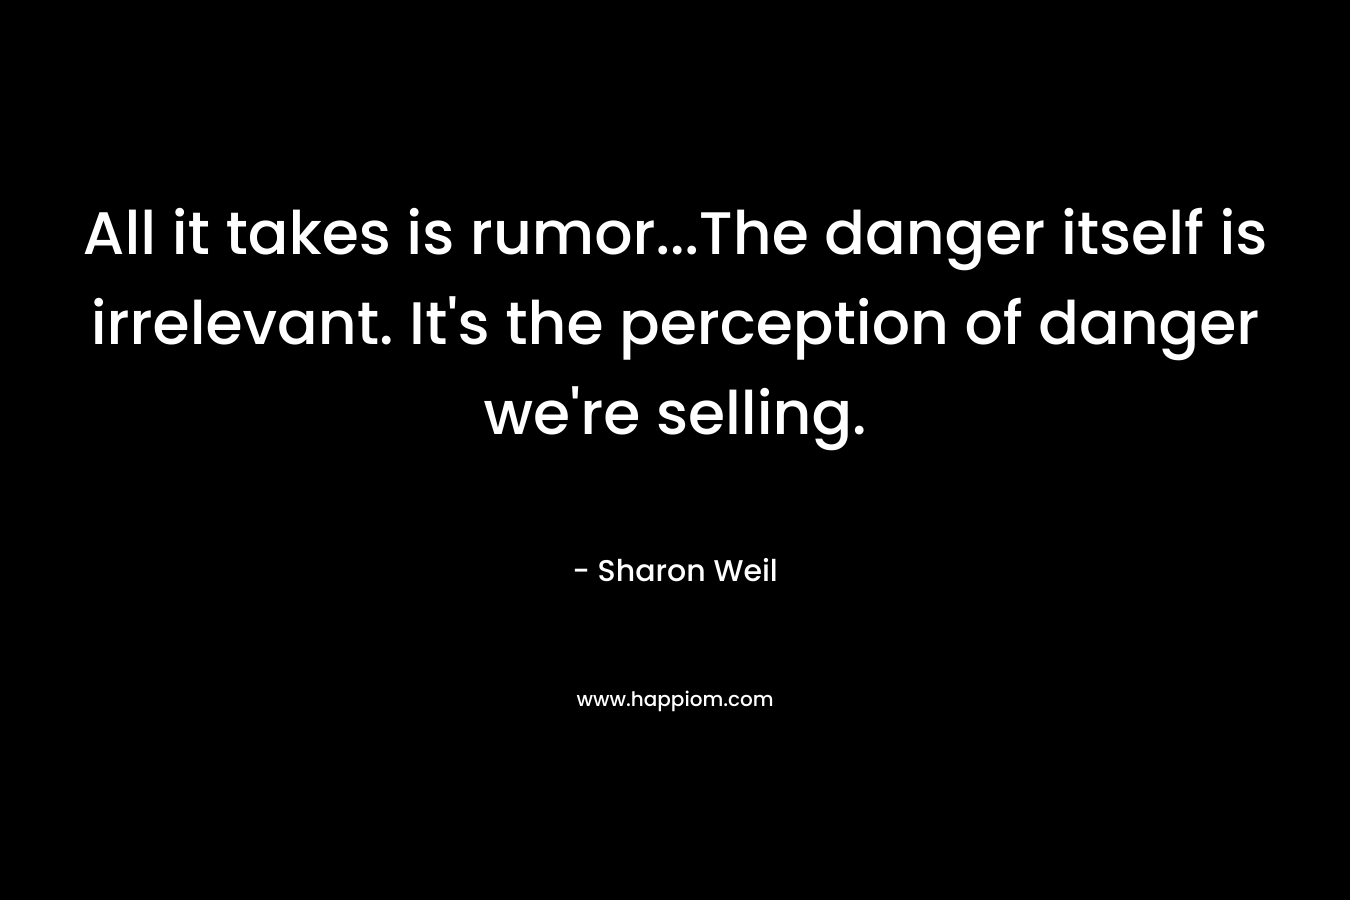 All it takes is rumor...The danger itself is irrelevant. It's the perception of danger we're selling.